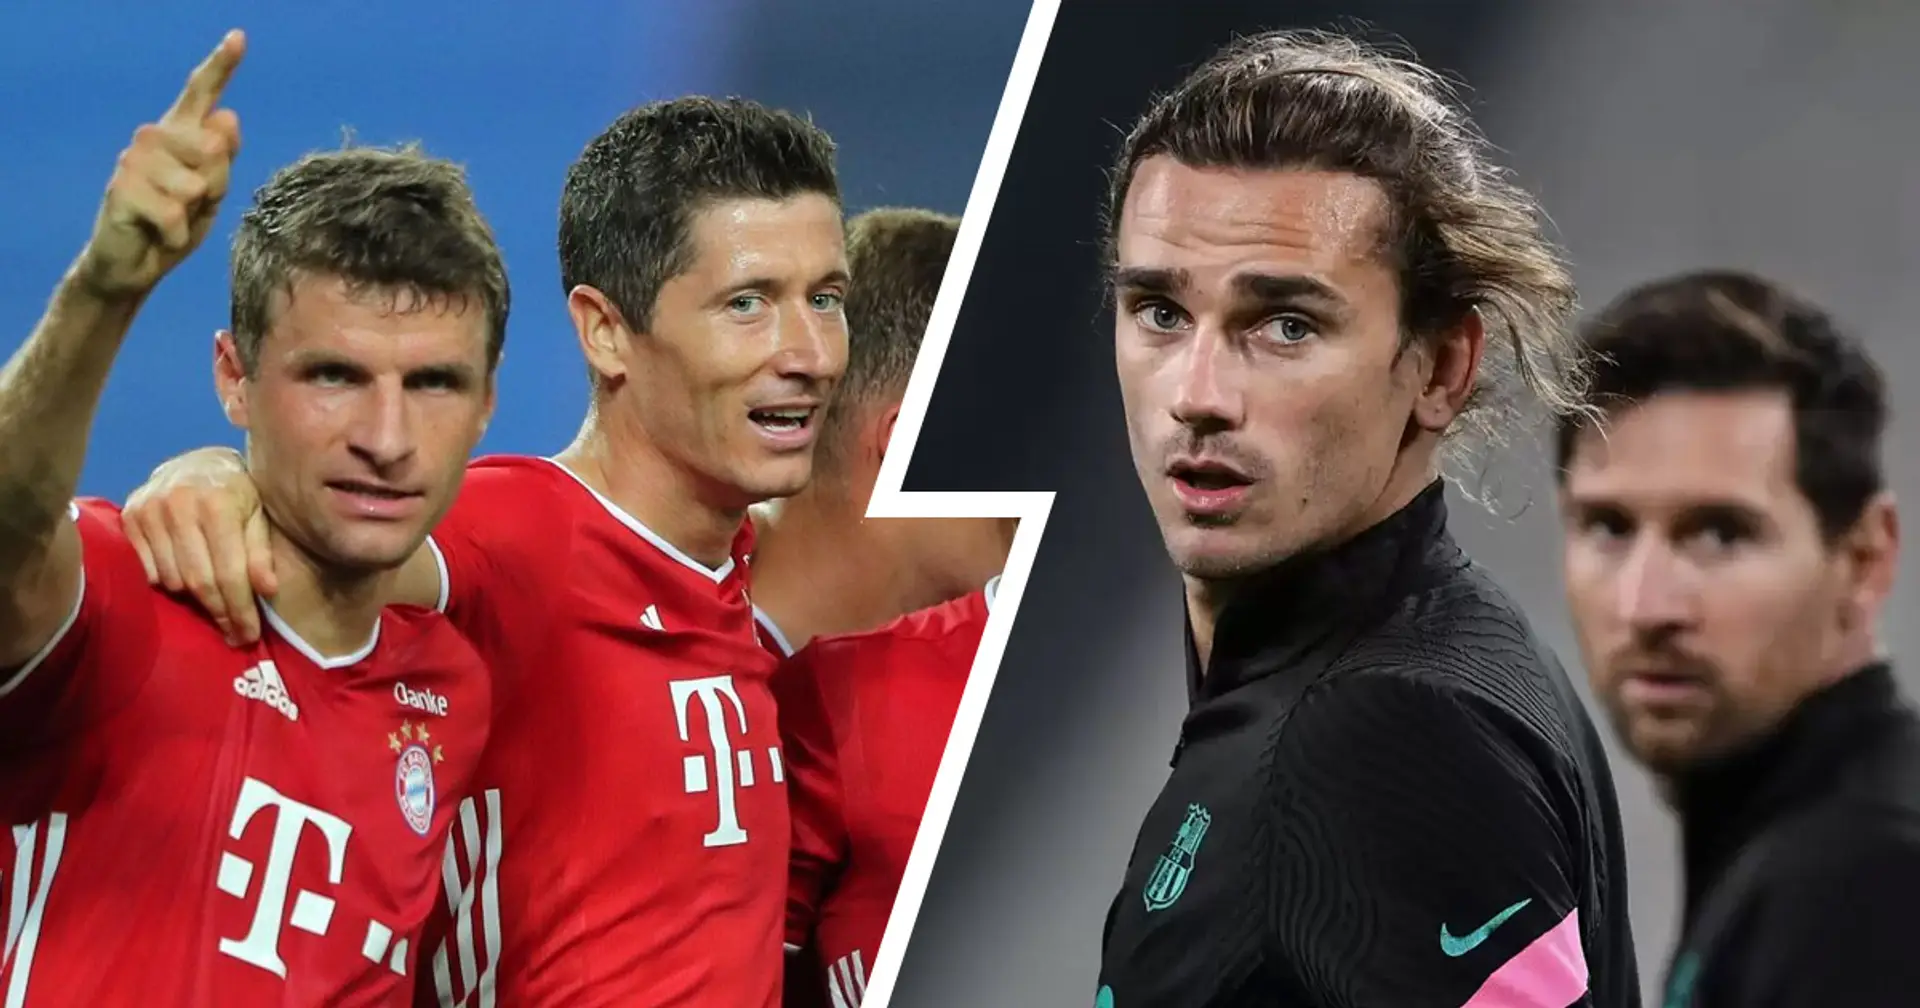 Revealed: Where Messi and Griezmann stand among best attacking duos in Europe's top 5 leagues